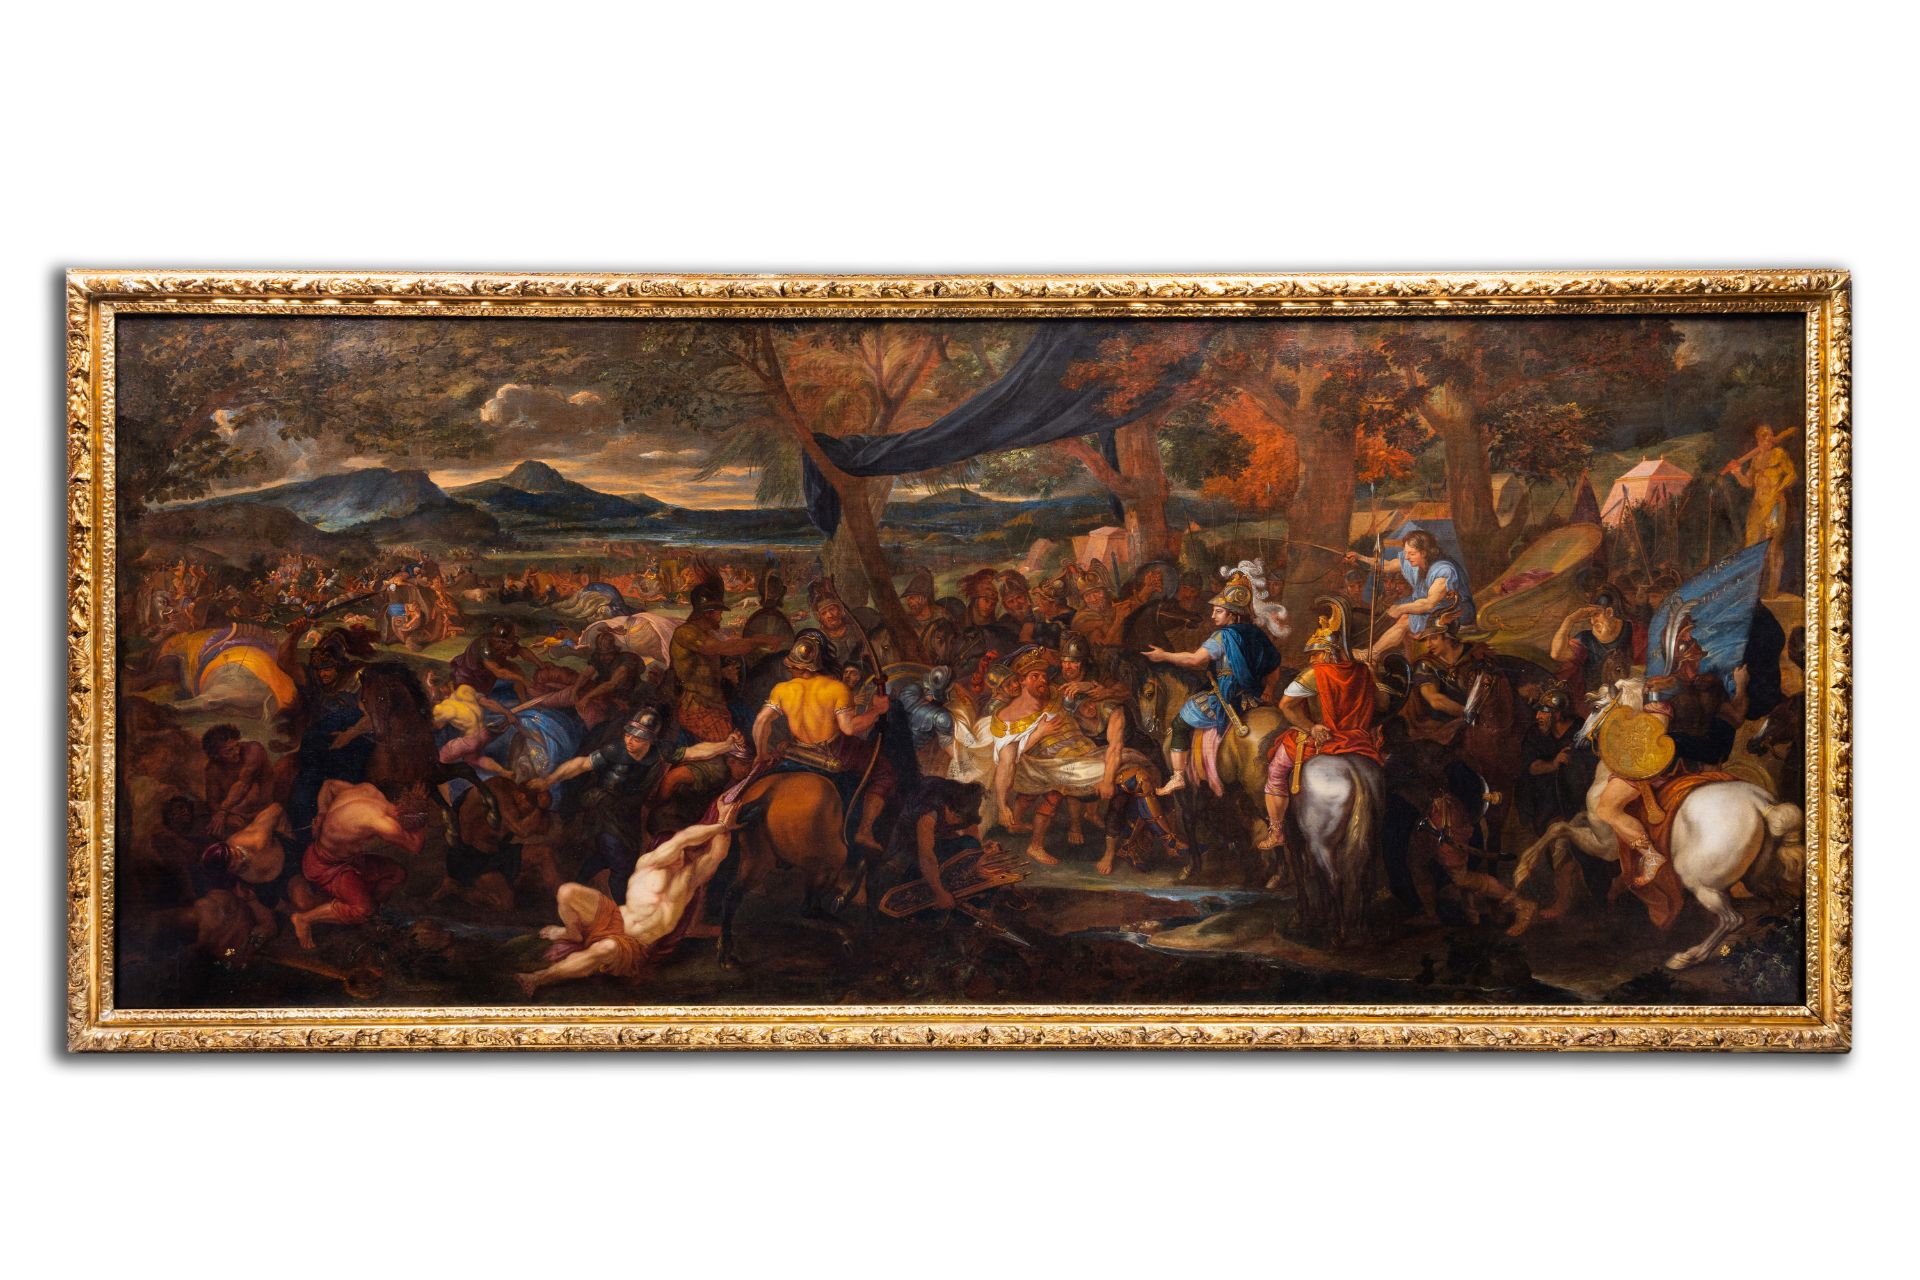 French school, workshop of Charles le Brun (1619-1690): Alexander and Poros in the Battle of Hydaspe - Image 3 of 24